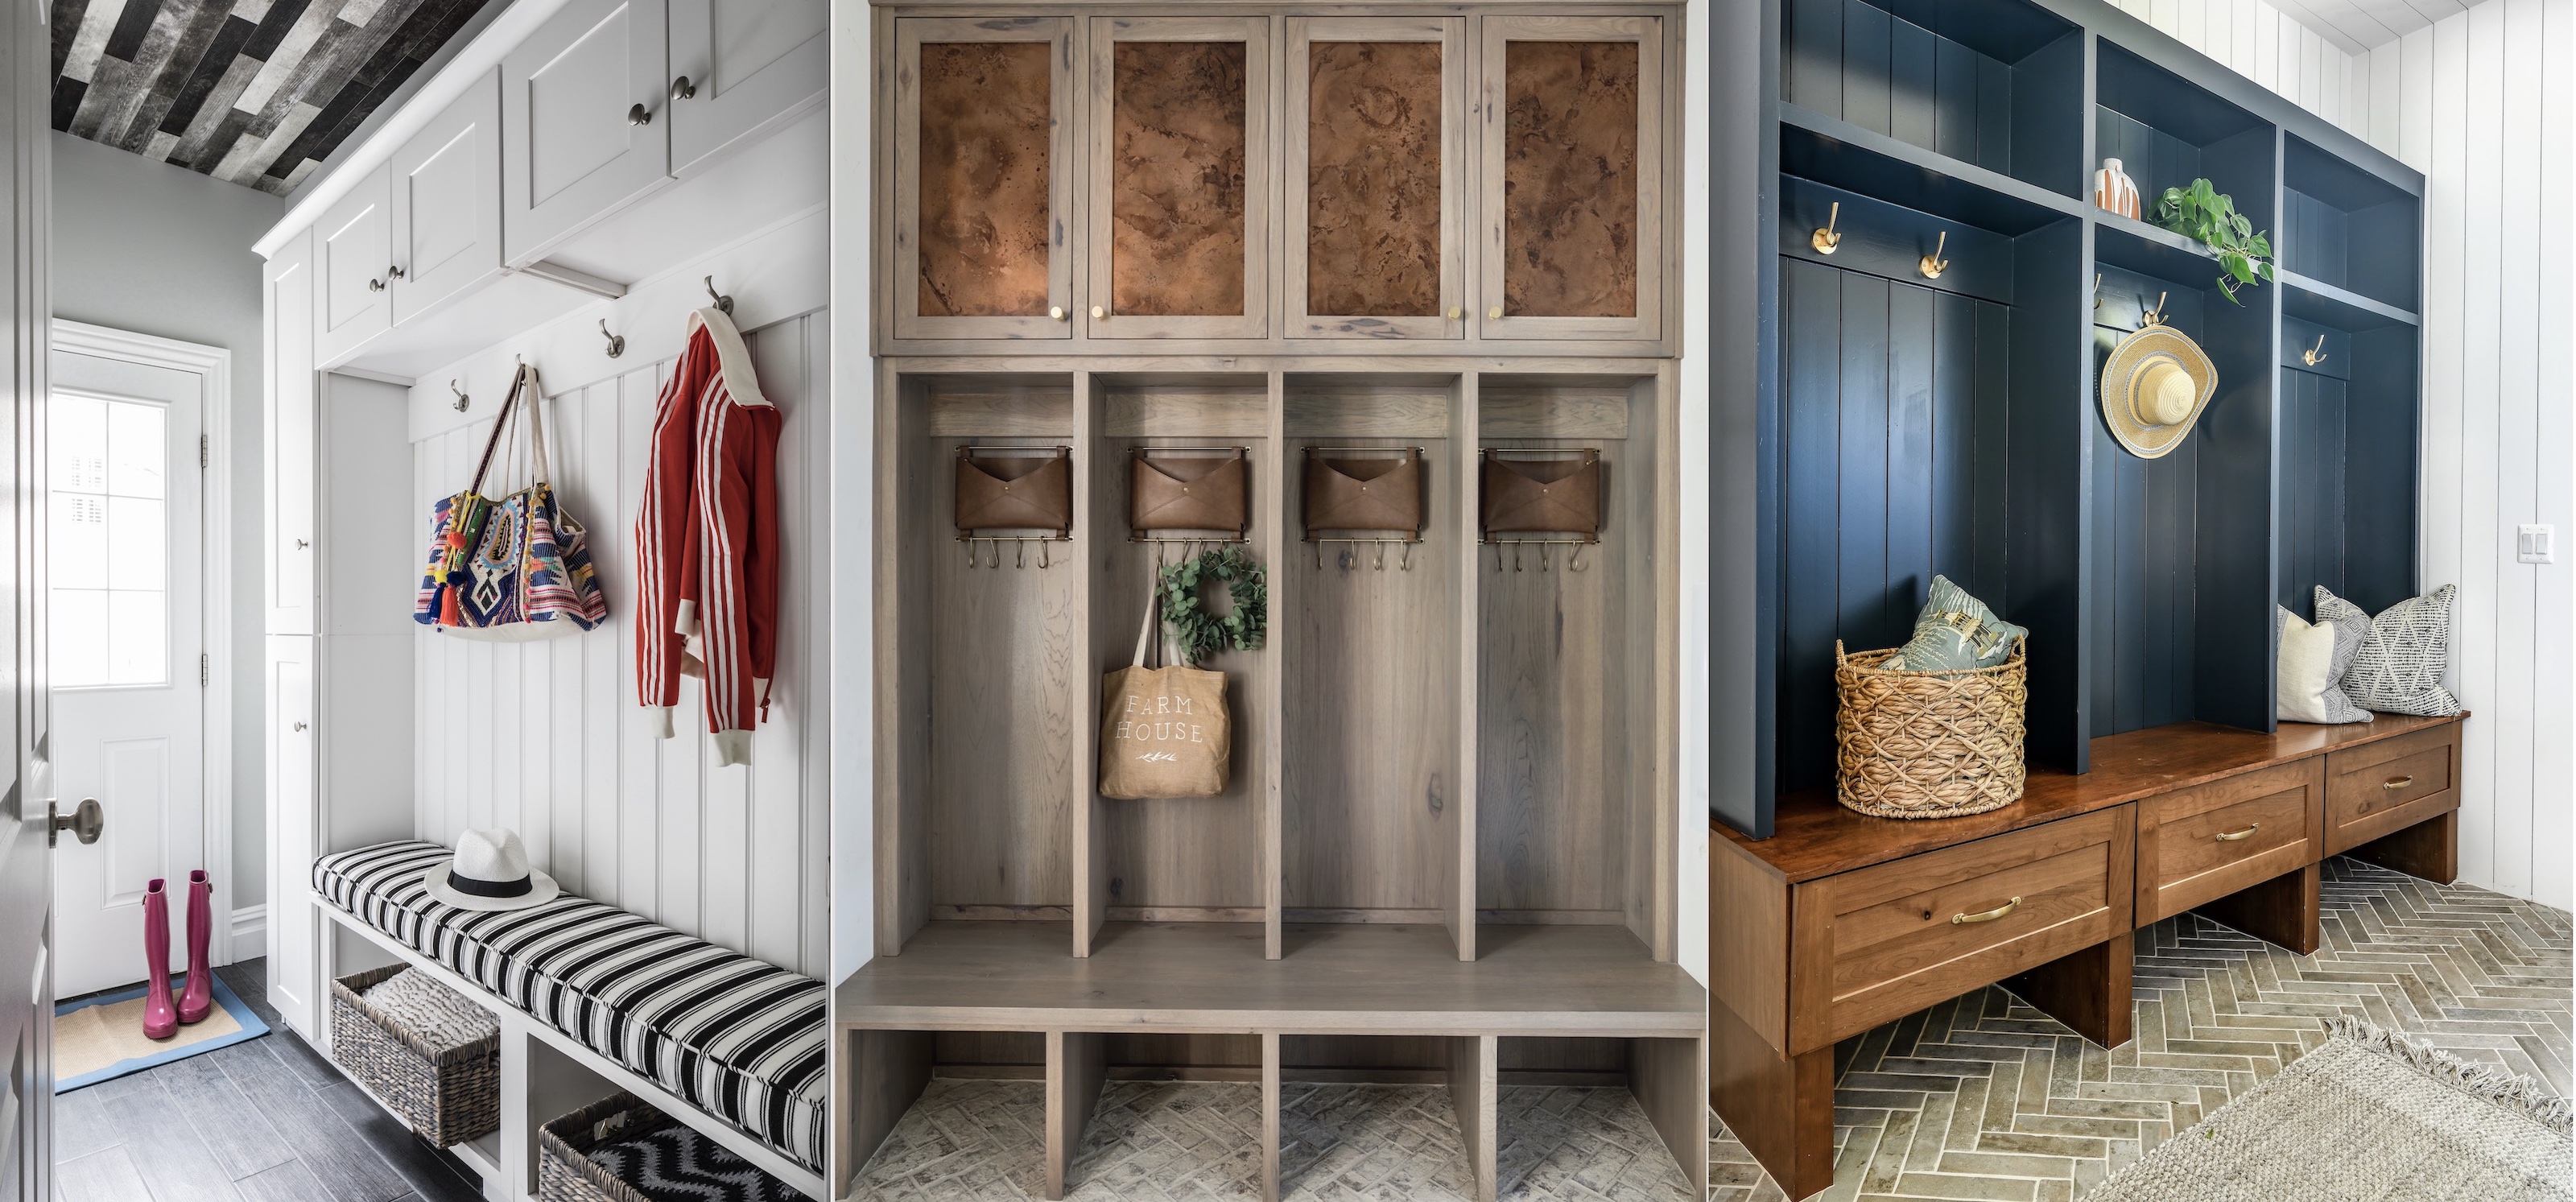 Mud Room Meets Laundry Room: The Ultimate Combo for a Clutter-Free Home